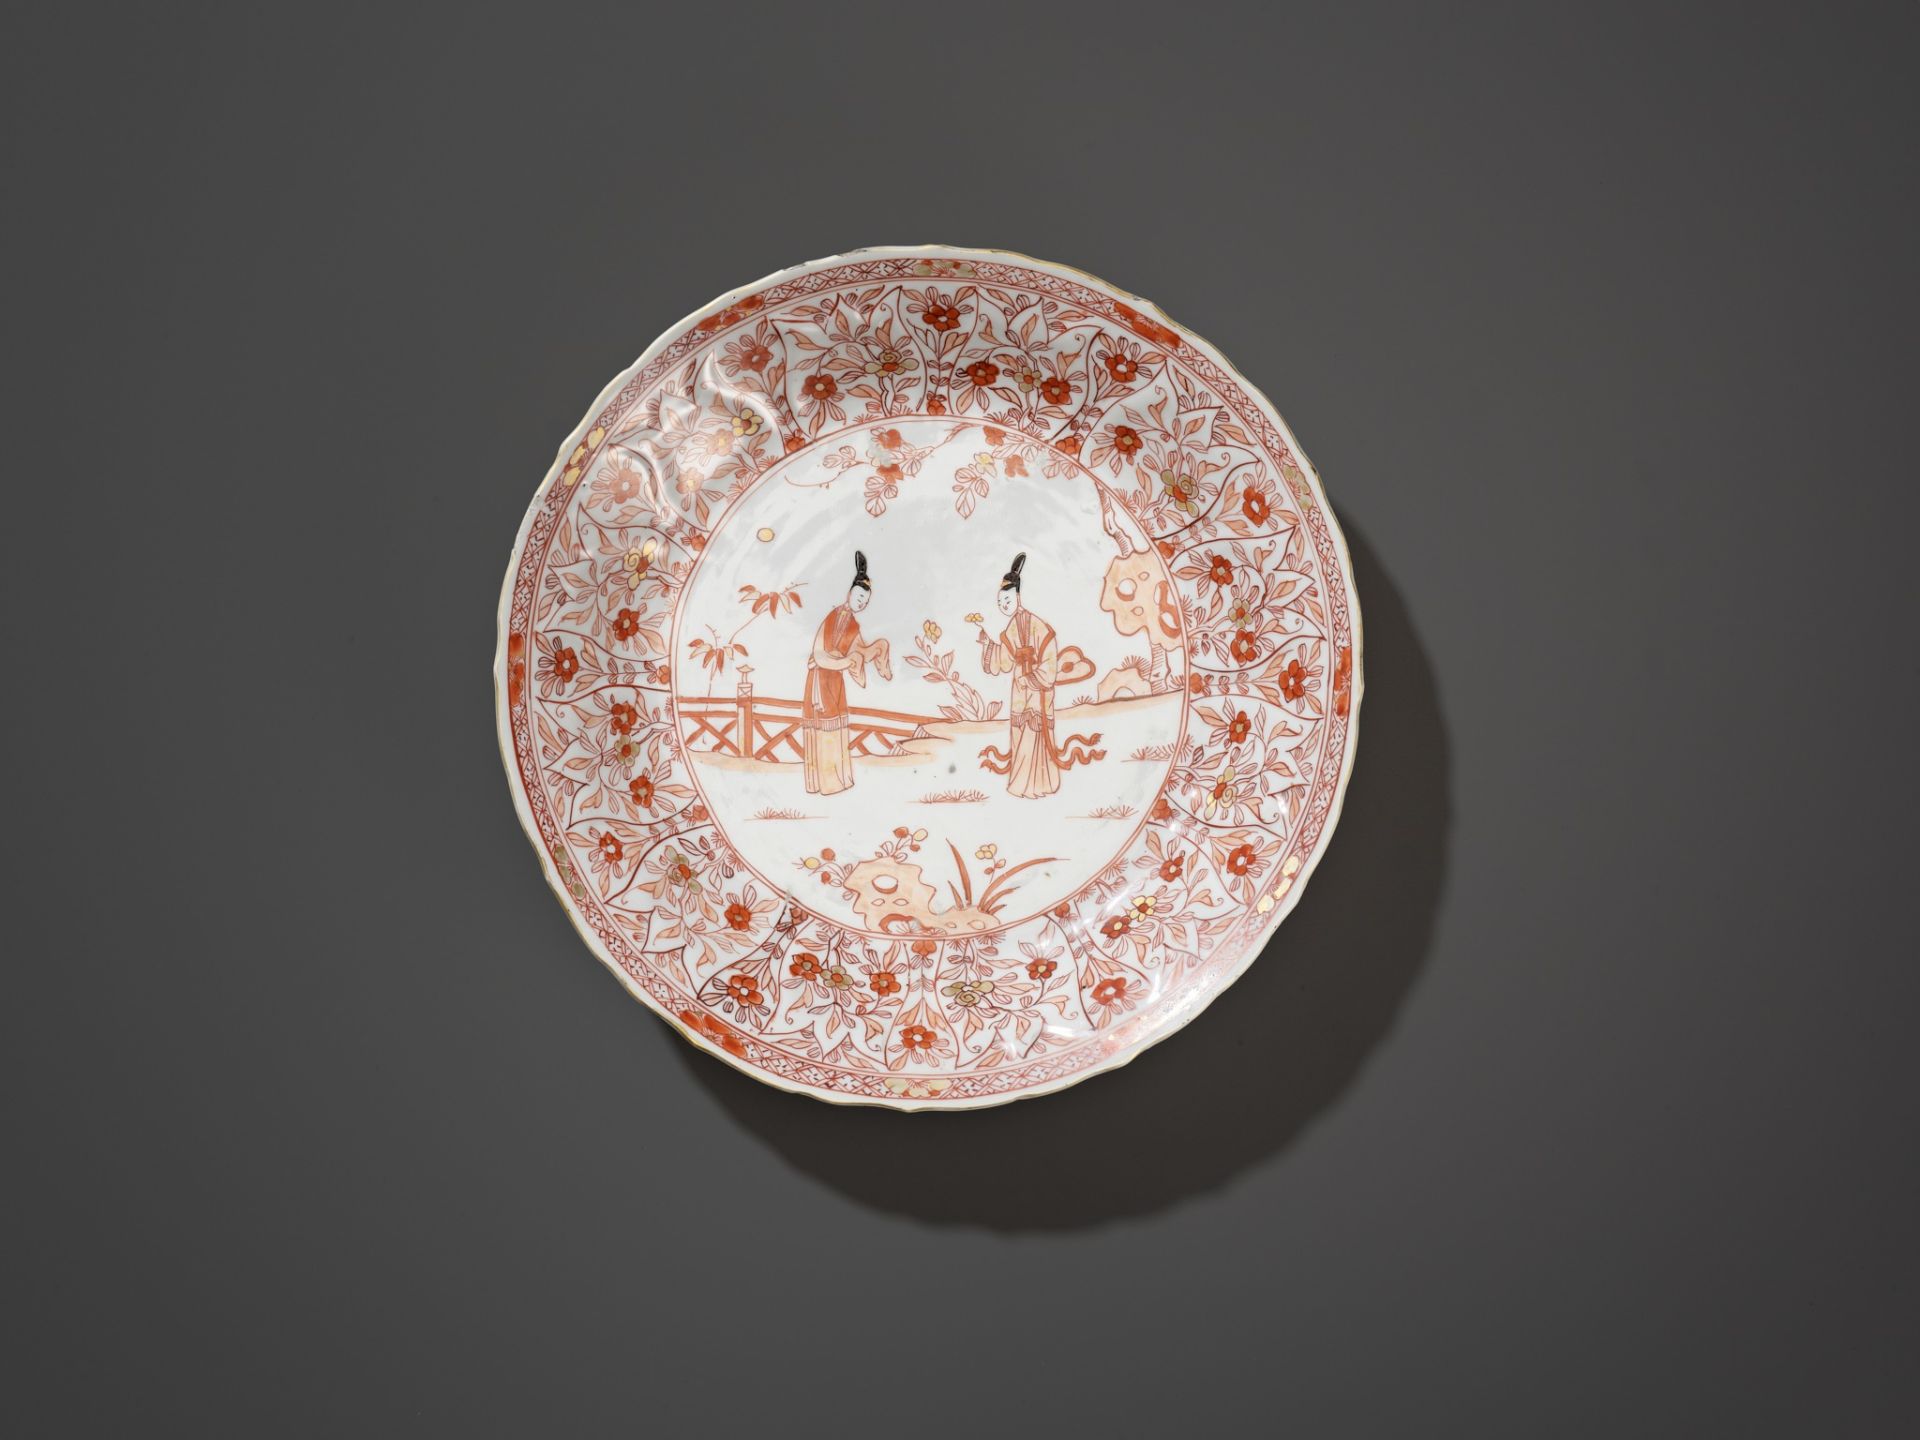 A BARBED-RIM IRON-RED AND GILT-DECORATED 'LADIES' DISH, KANGXI PERIOD - Image 6 of 6